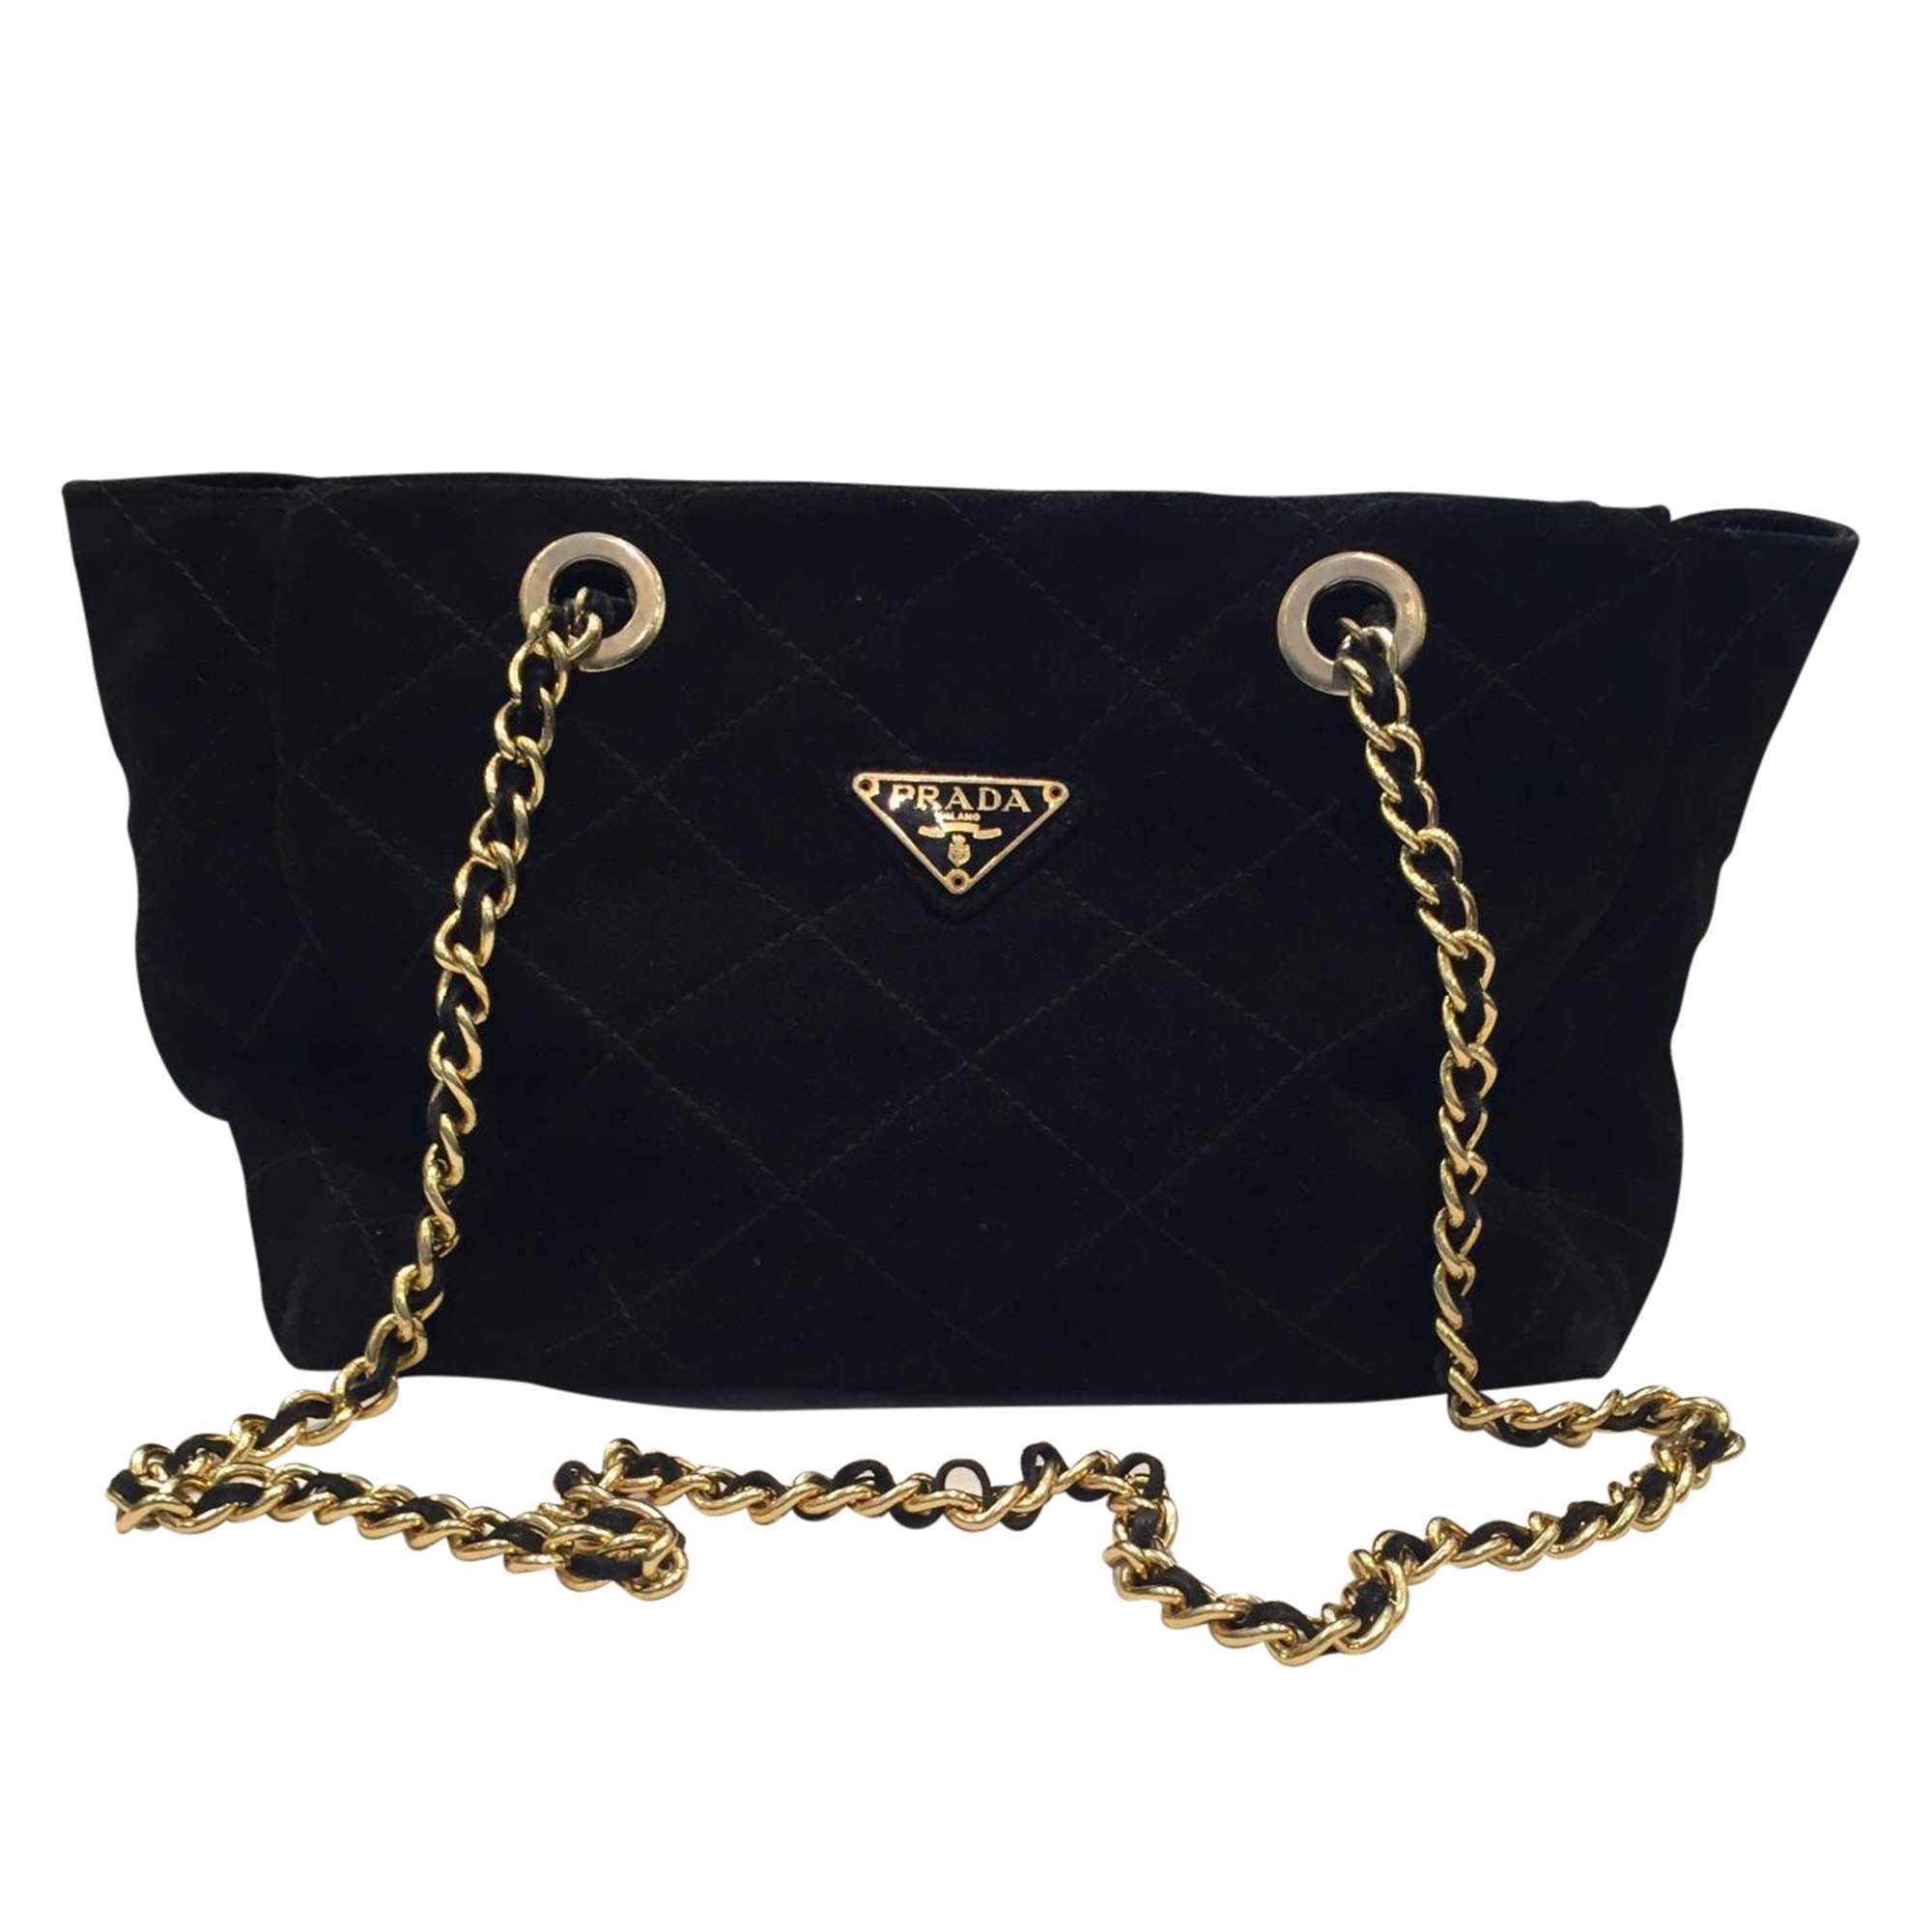 Vintage classic Prada  bag in black suede and gold metal long chain
Zip closure. Interior in black monogrammed fabrics. 
2 handles in gold metal and leather
Color: Black
Lenght: 26 cm / 10,23 inches
Height: 24 cm / 9,44 inches
Depth: 10 cm / 3,93